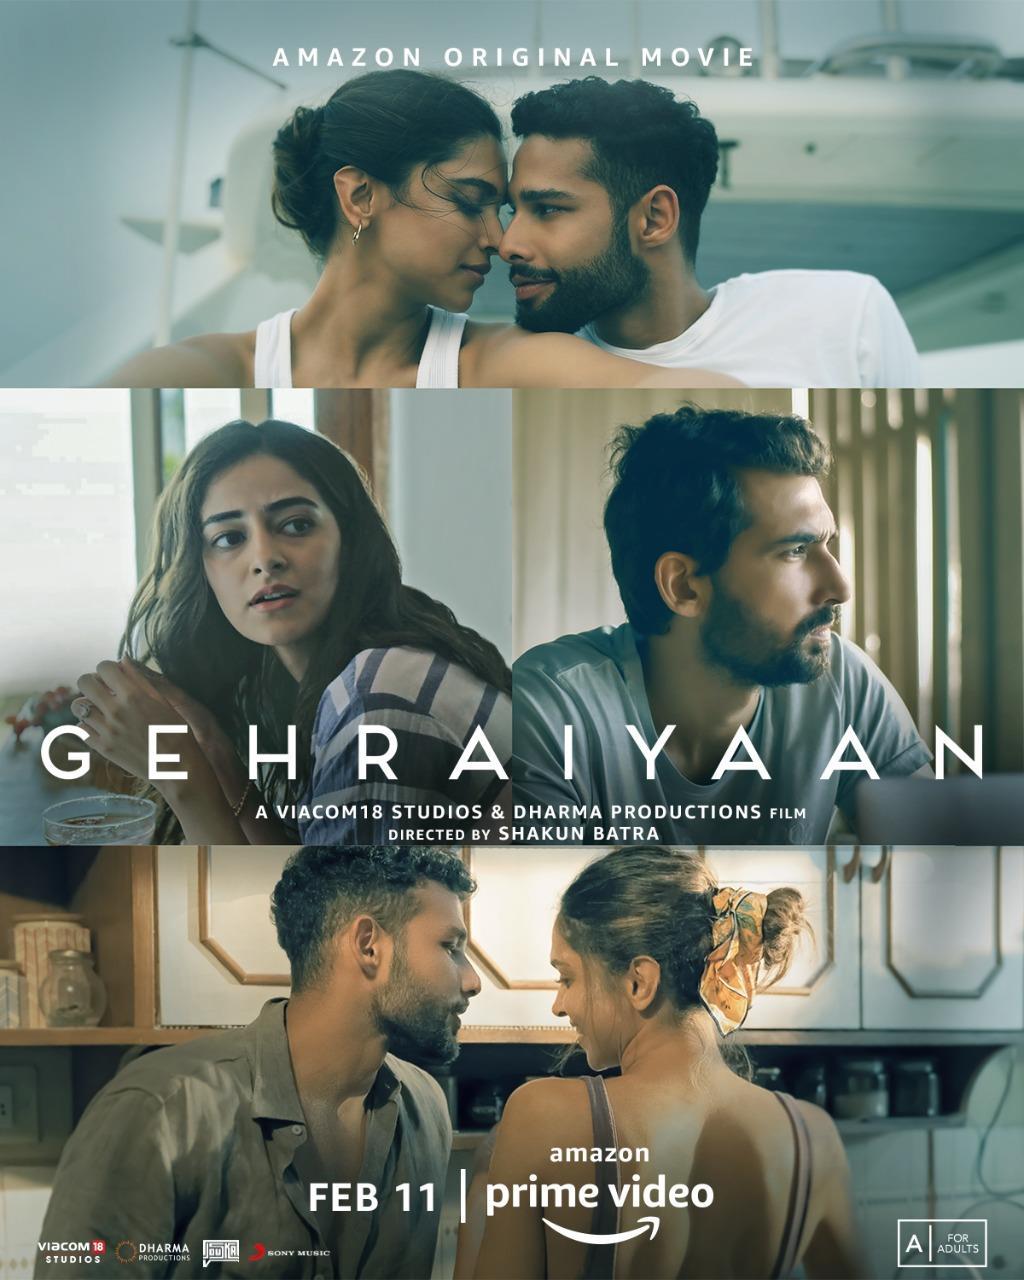 ‘Some intern is getting fired’; netizens take a dig at Dharma Production for accidently sharing negative review of ‘Gehraiyaan’